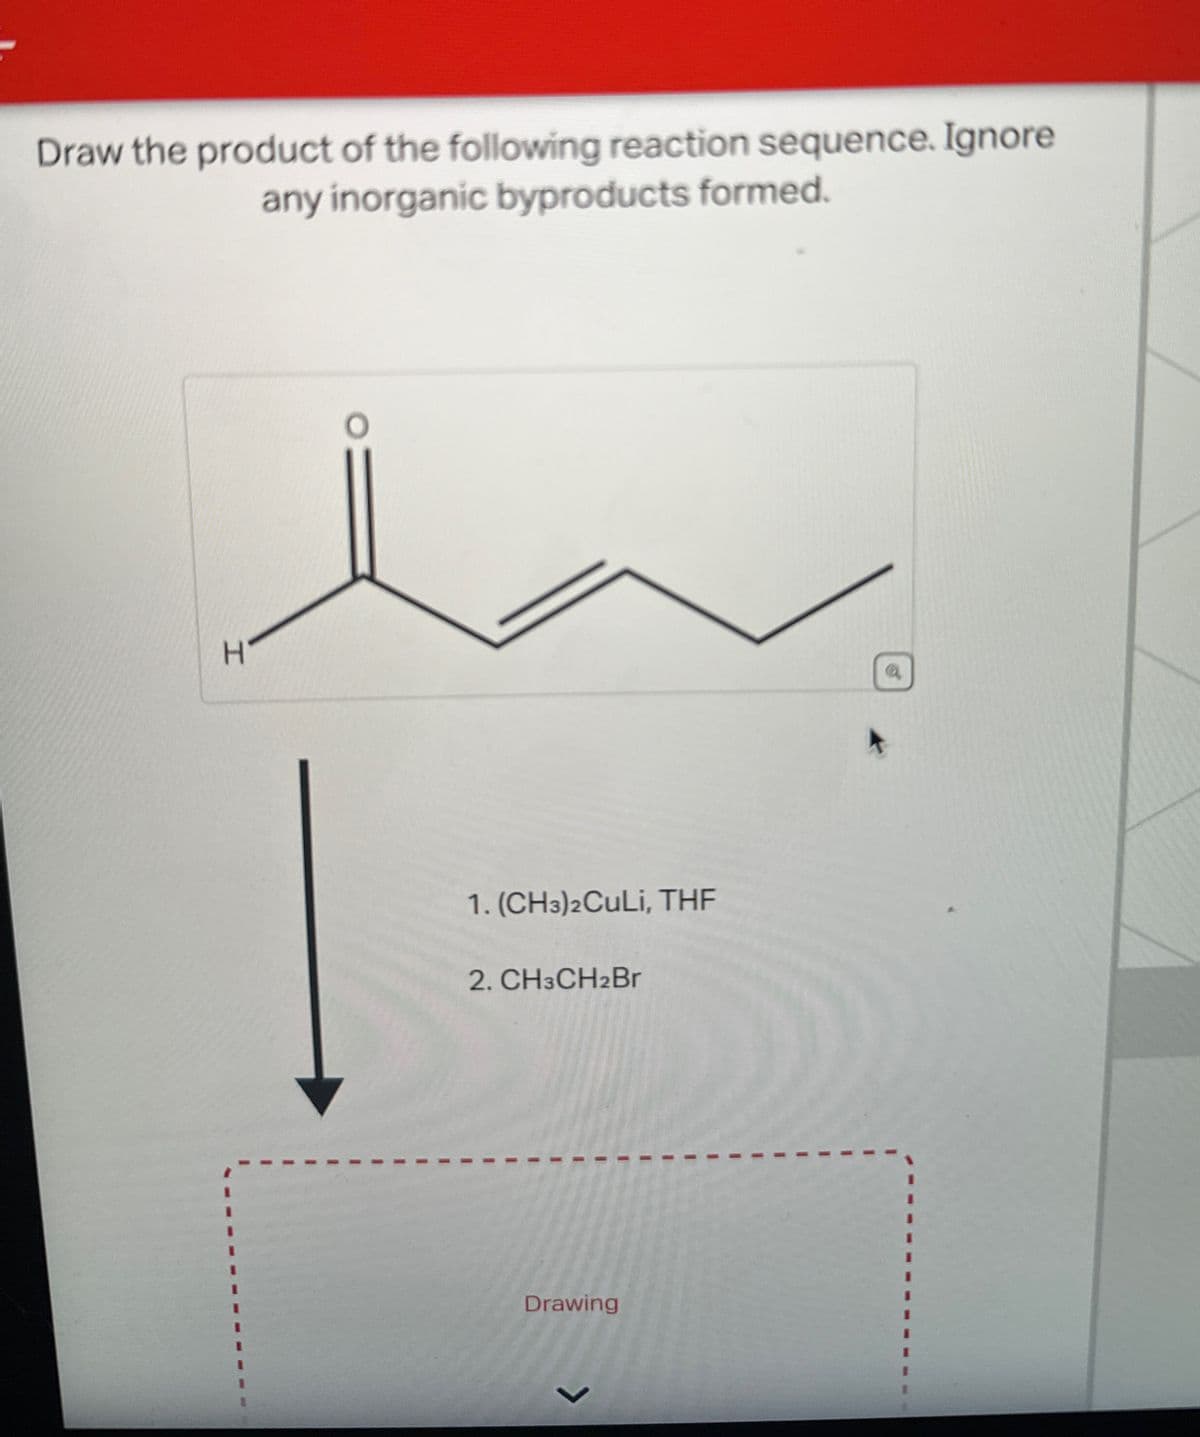 Draw the product of the following reaction sequence. Ignore
any inorganic byproducts formed.
H
1. (CH3)2 CuLi, THF
2. CH3CH2Br
Drawing
L
a